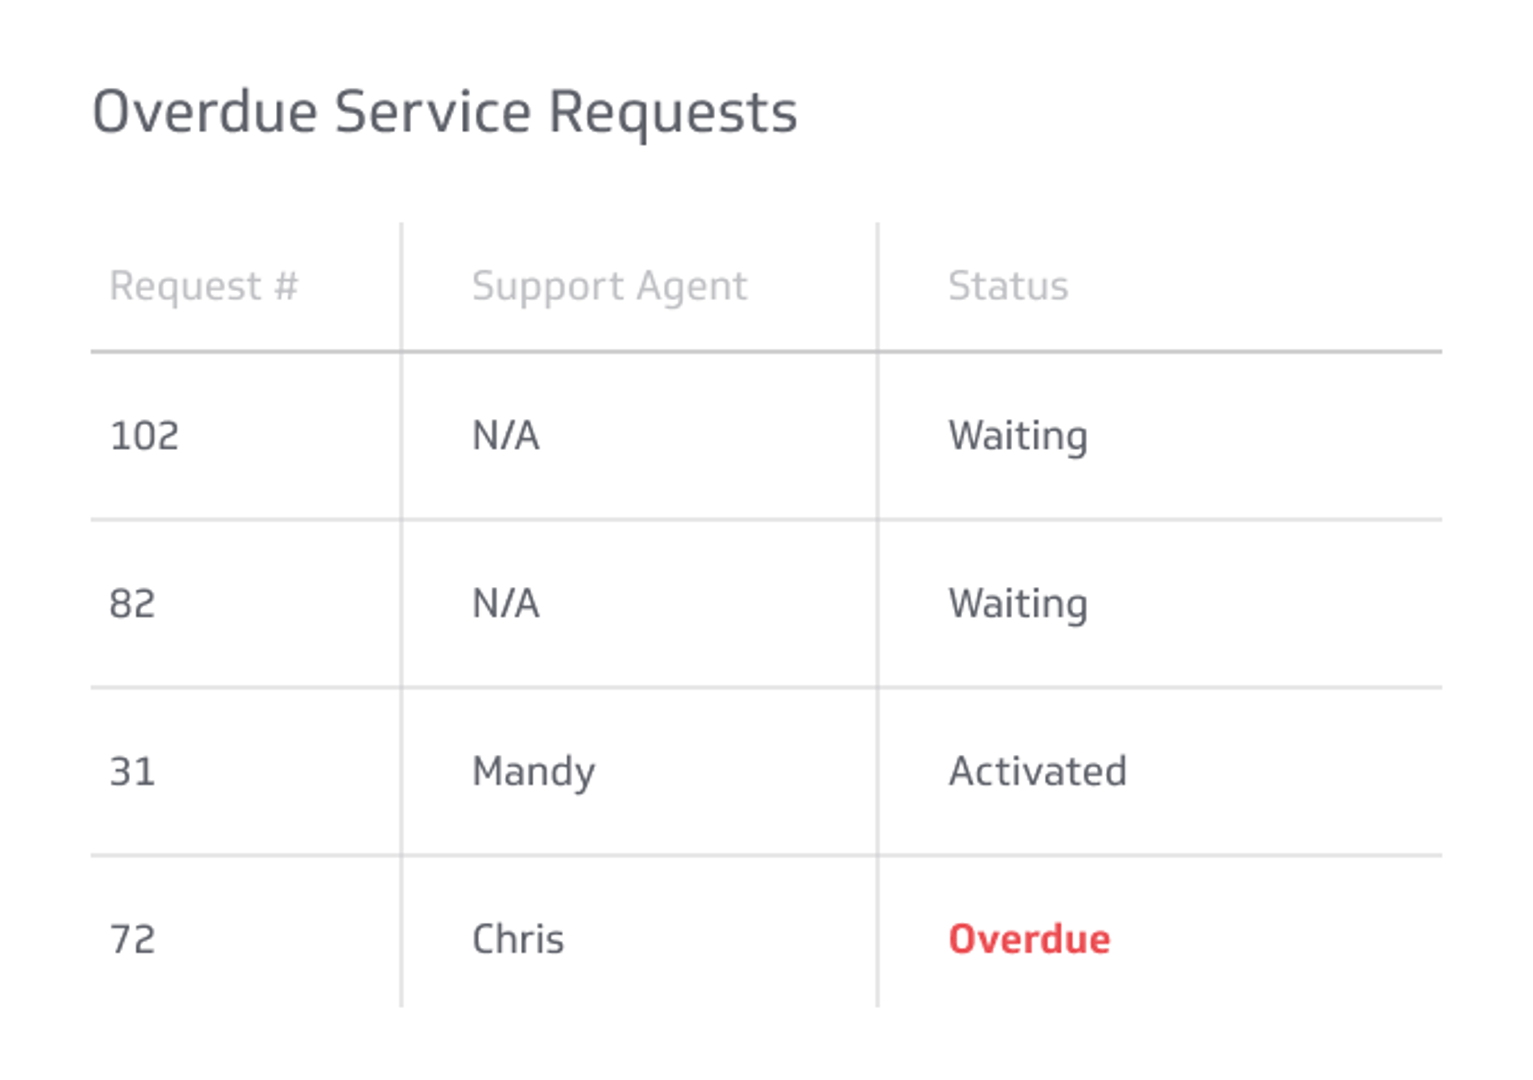 Related KPI Examples - Overdue Service Requests Metric